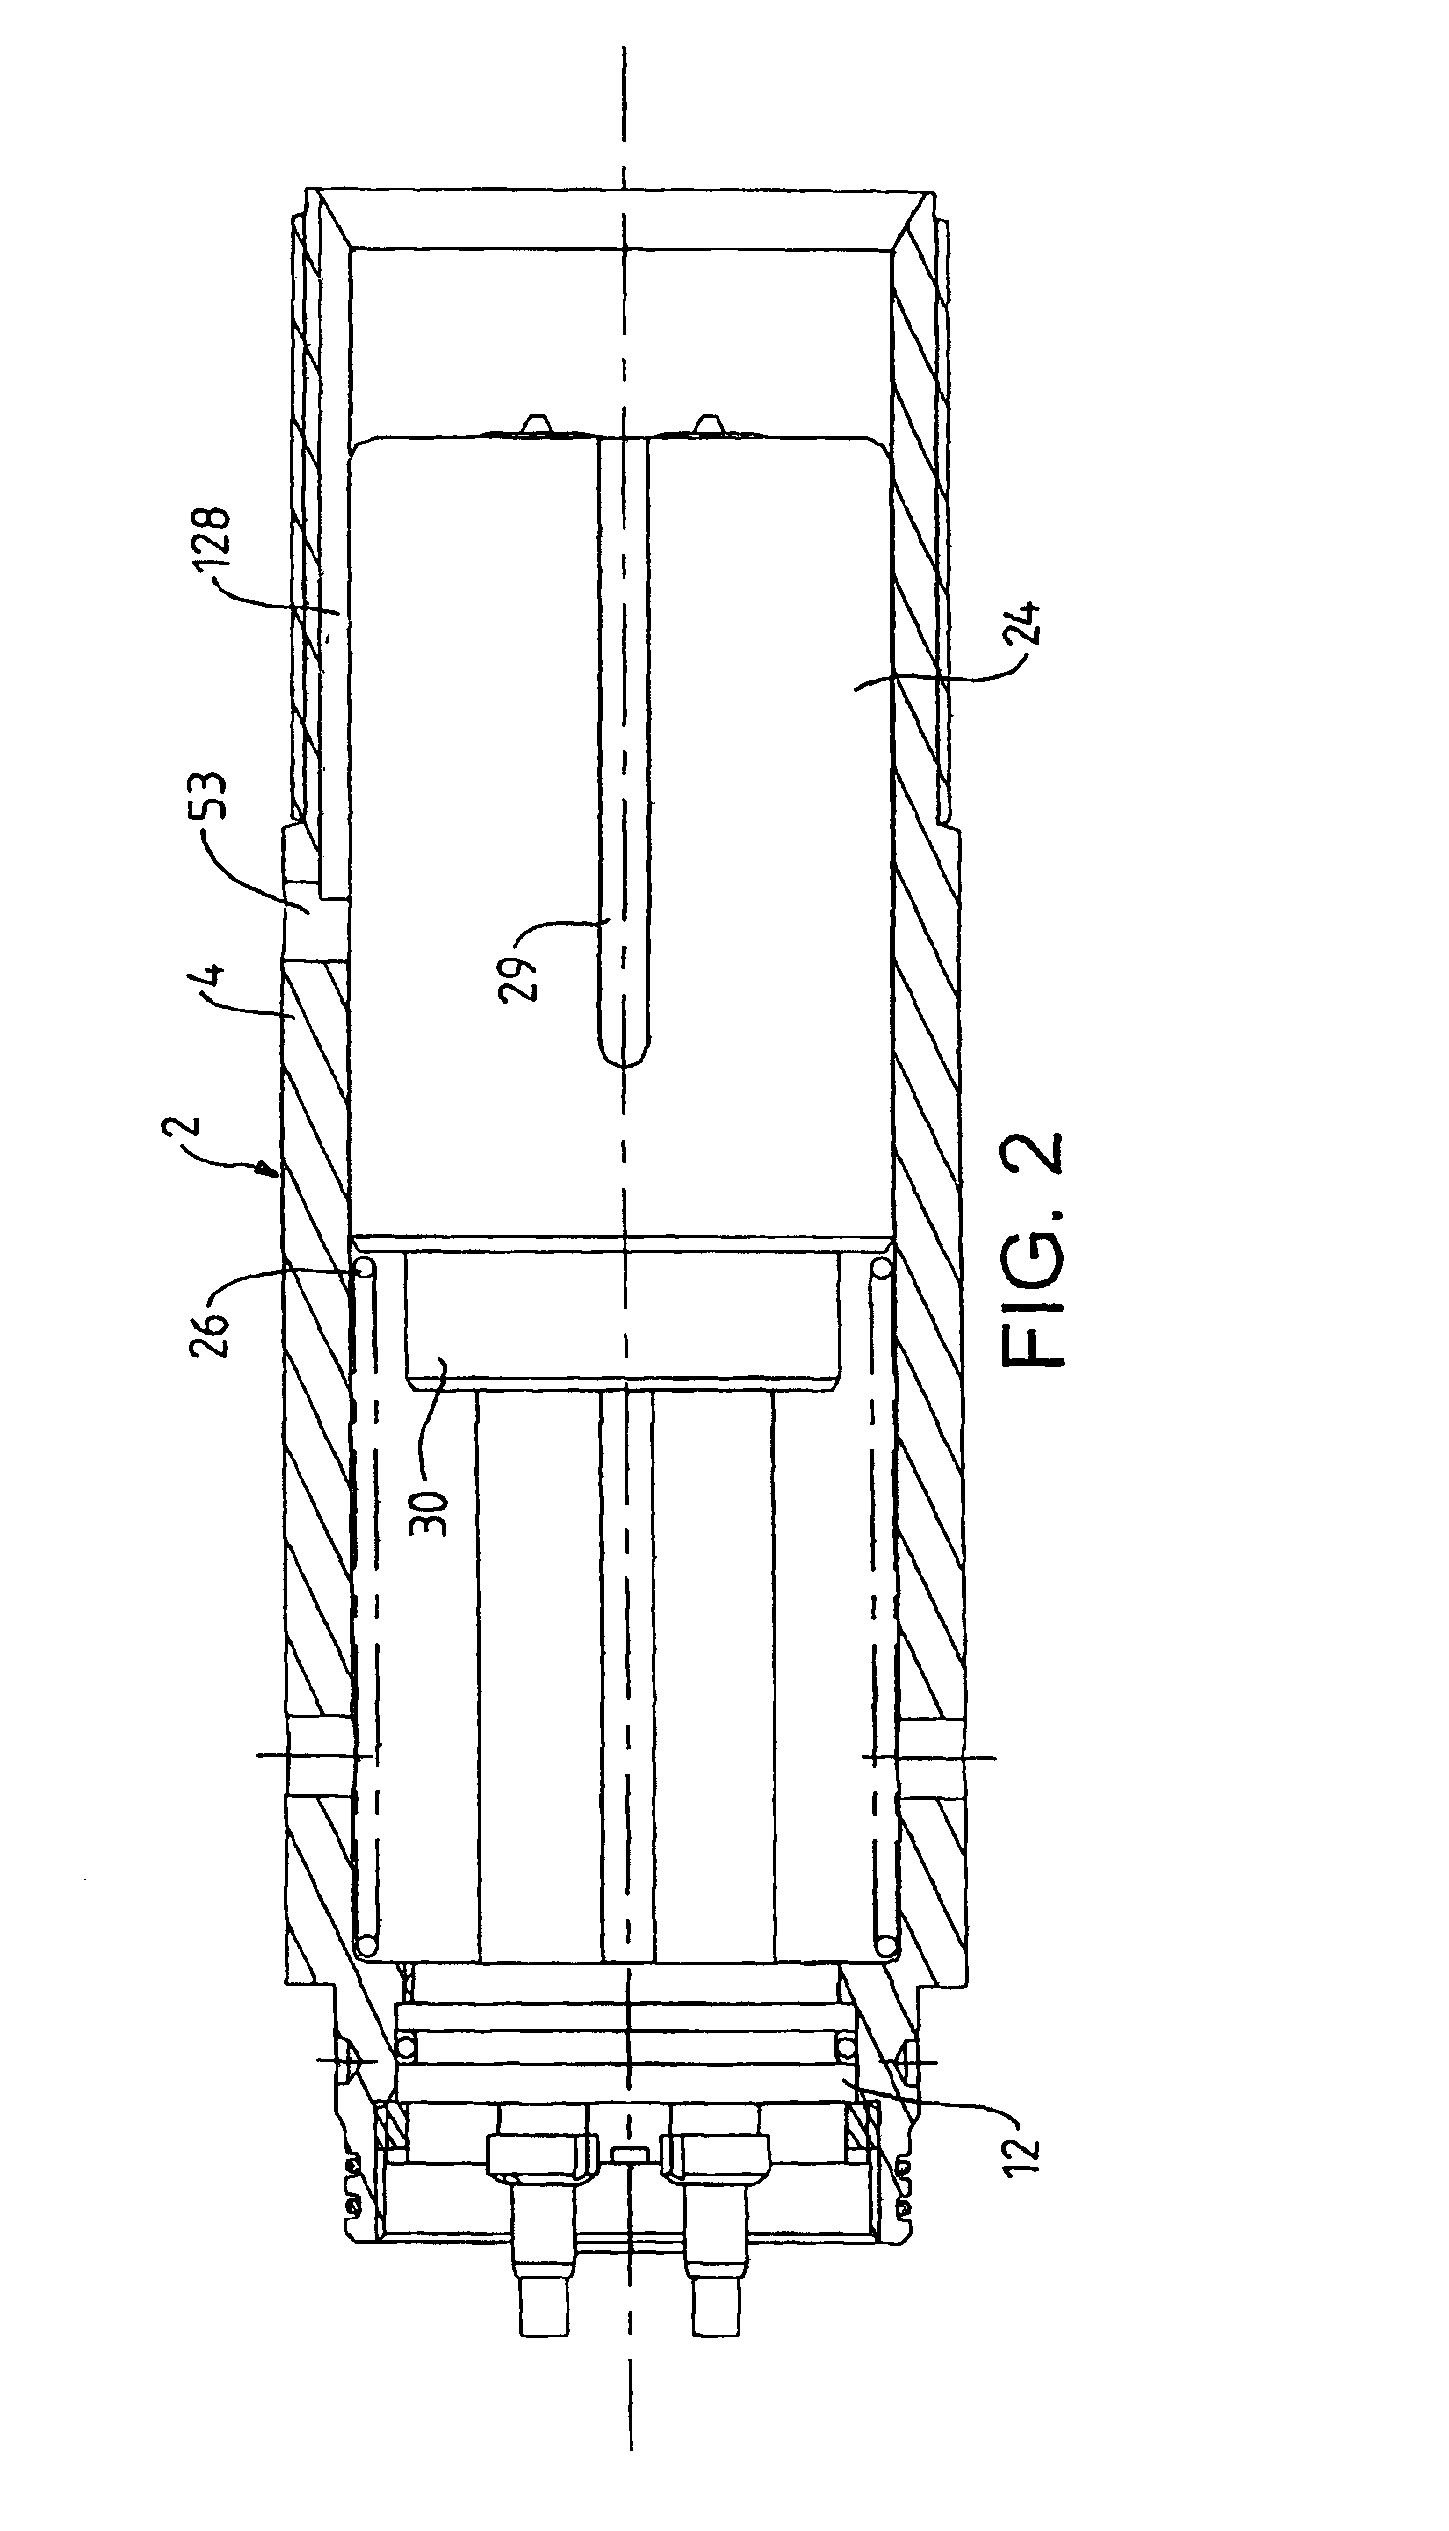 Connector for making an optical connection underwater